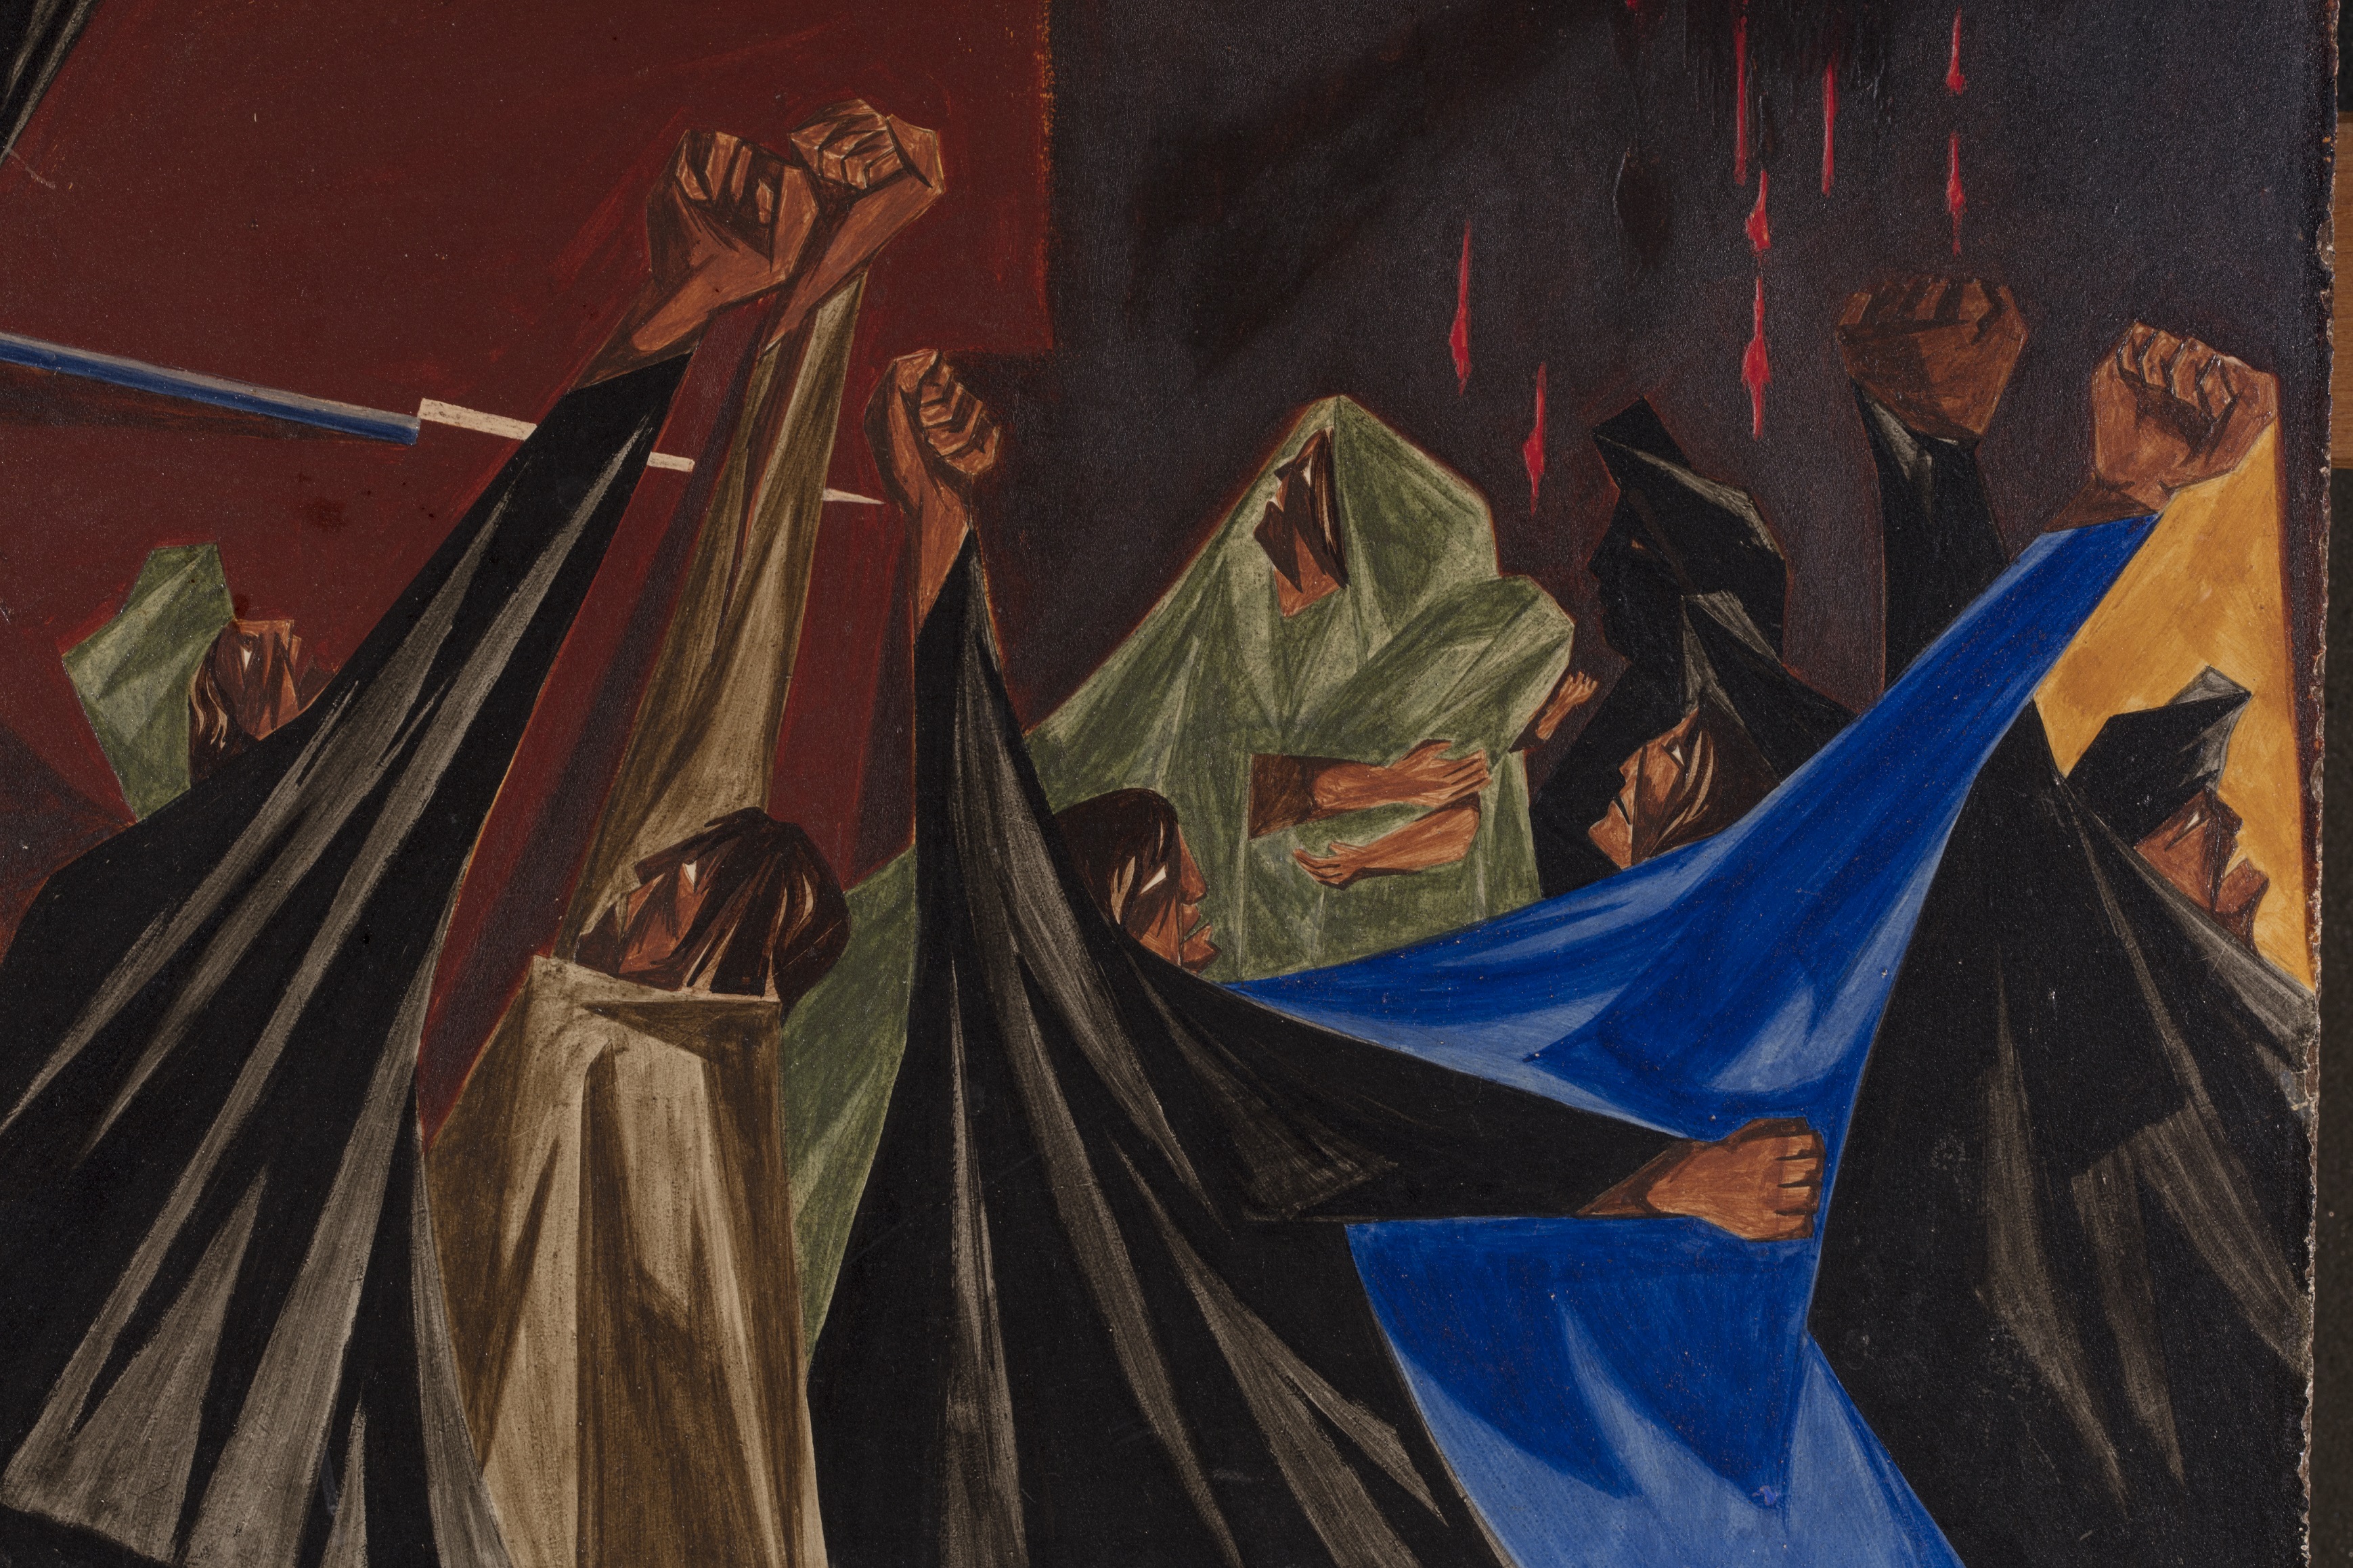 Jacob Lawrence, ‘. . . is life so dear or peace so sweet as to be purchased at the price of chains and slavery?—Patrick Henry, 1775,’ Panel 1, 1955, from Struggle: From the History of the American People, 1954–56, egg tempera on hardboard. Collection of Harvey and Harvey-Ann Ross. © 2022 The Jacob and Gwendolyn Knight Lawrence Foundation, Seattle / Artists Rights Society (ARS), New York. 